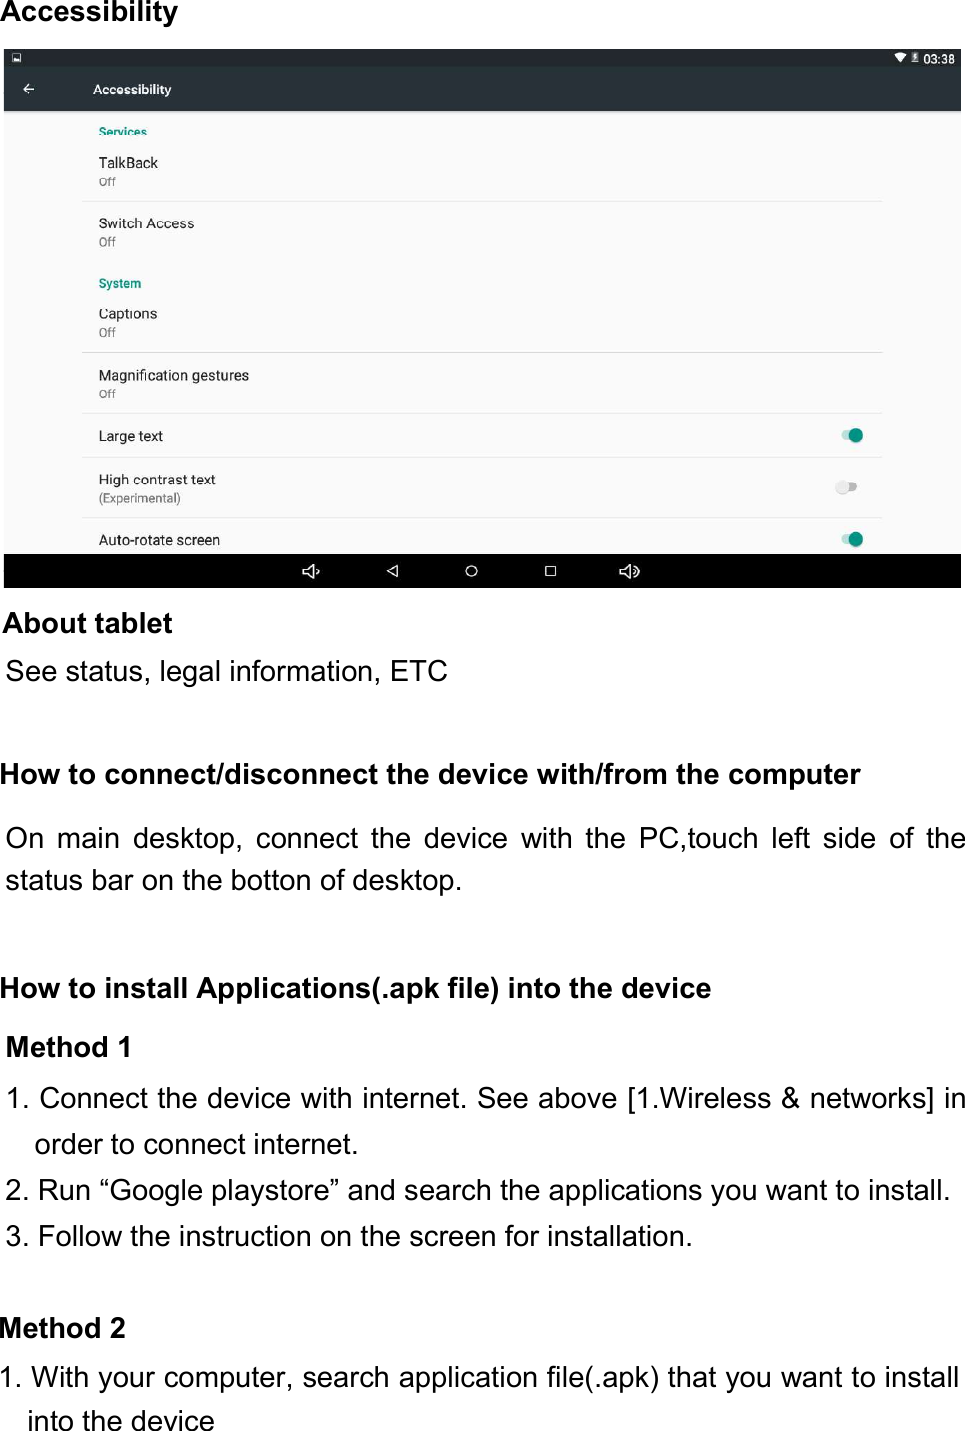 About tabletSee status, legal information, ETCHow to connect/disconnect the device with/from the computerOn main desktop, connect the device with the PC,touch left side of thestatus bar on the botton of desktop.How to install Applications(.apk file) into the deviceMethod 11. Connect the device with internet. See above [1.Wireless &amp; networks] inorder to connect internet.2. Run “Google playstore” and search the applications you want to install.3. Follow the instruction on the screen for installation.Method 21. With your computer, search application file(.apk) that you want to installinto the deviceAccessibility